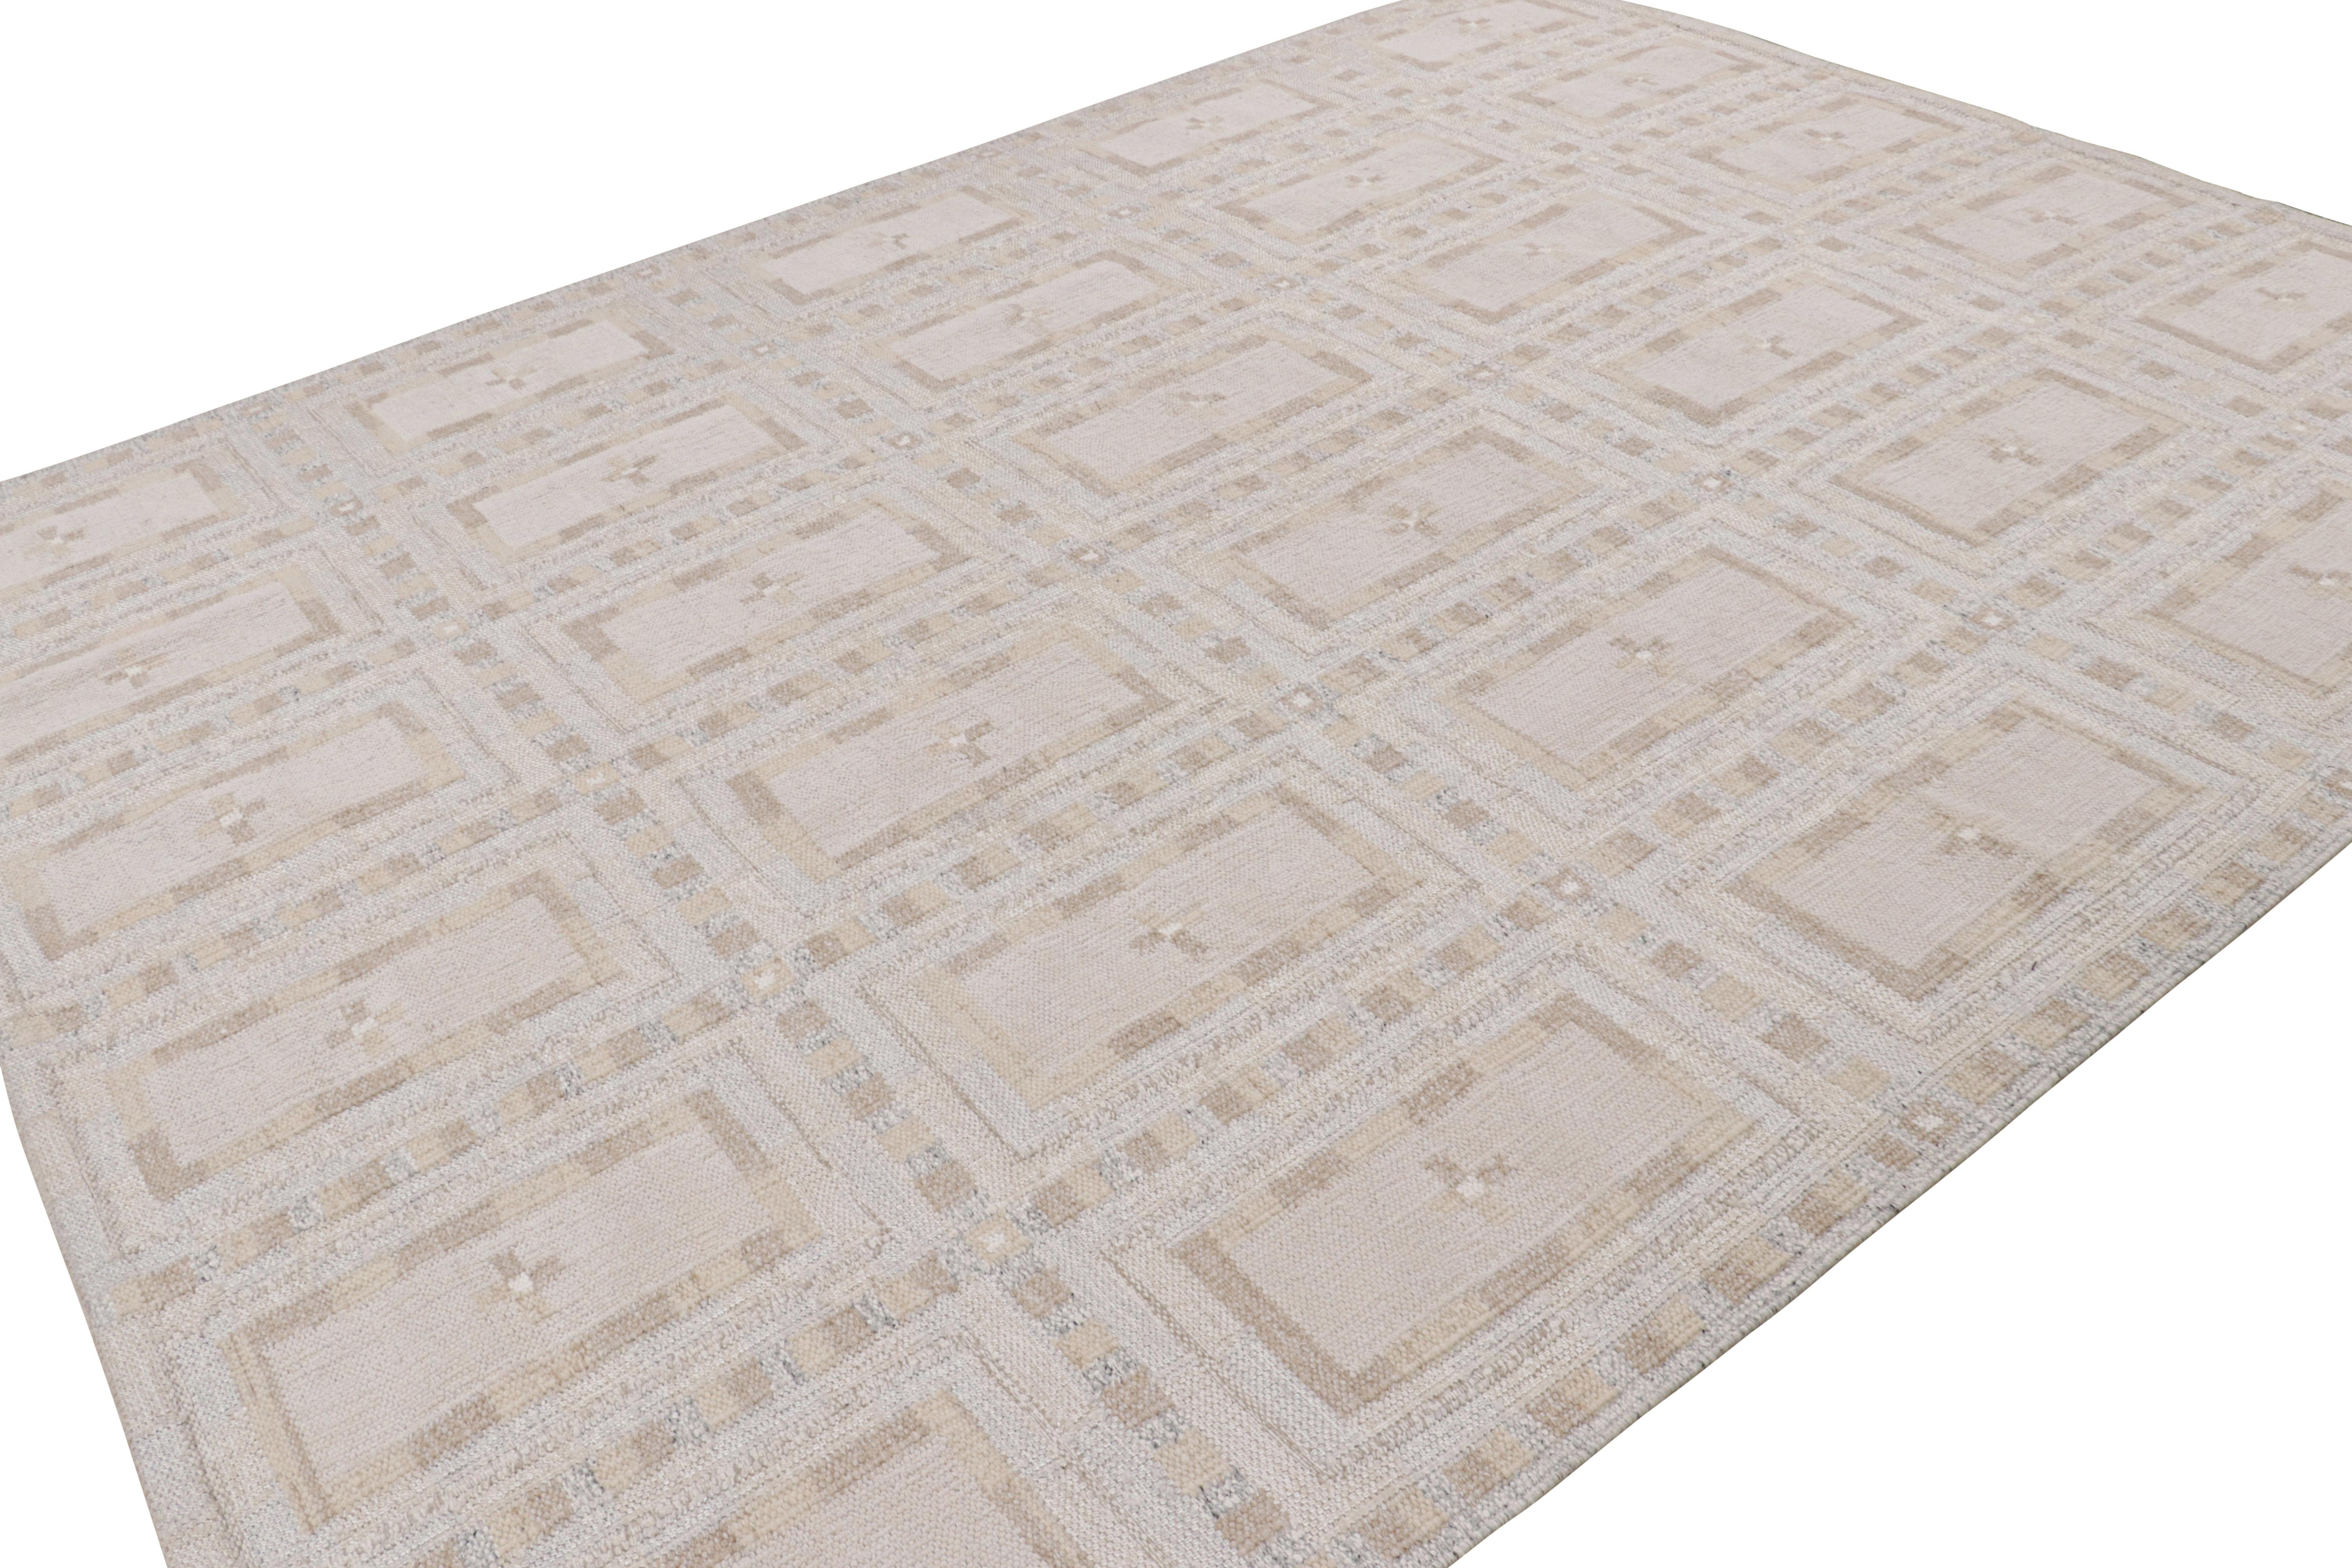 Indian Rug & Kilim’s Scandinavian Style Rug with White and Beige-Brown Patterns For Sale